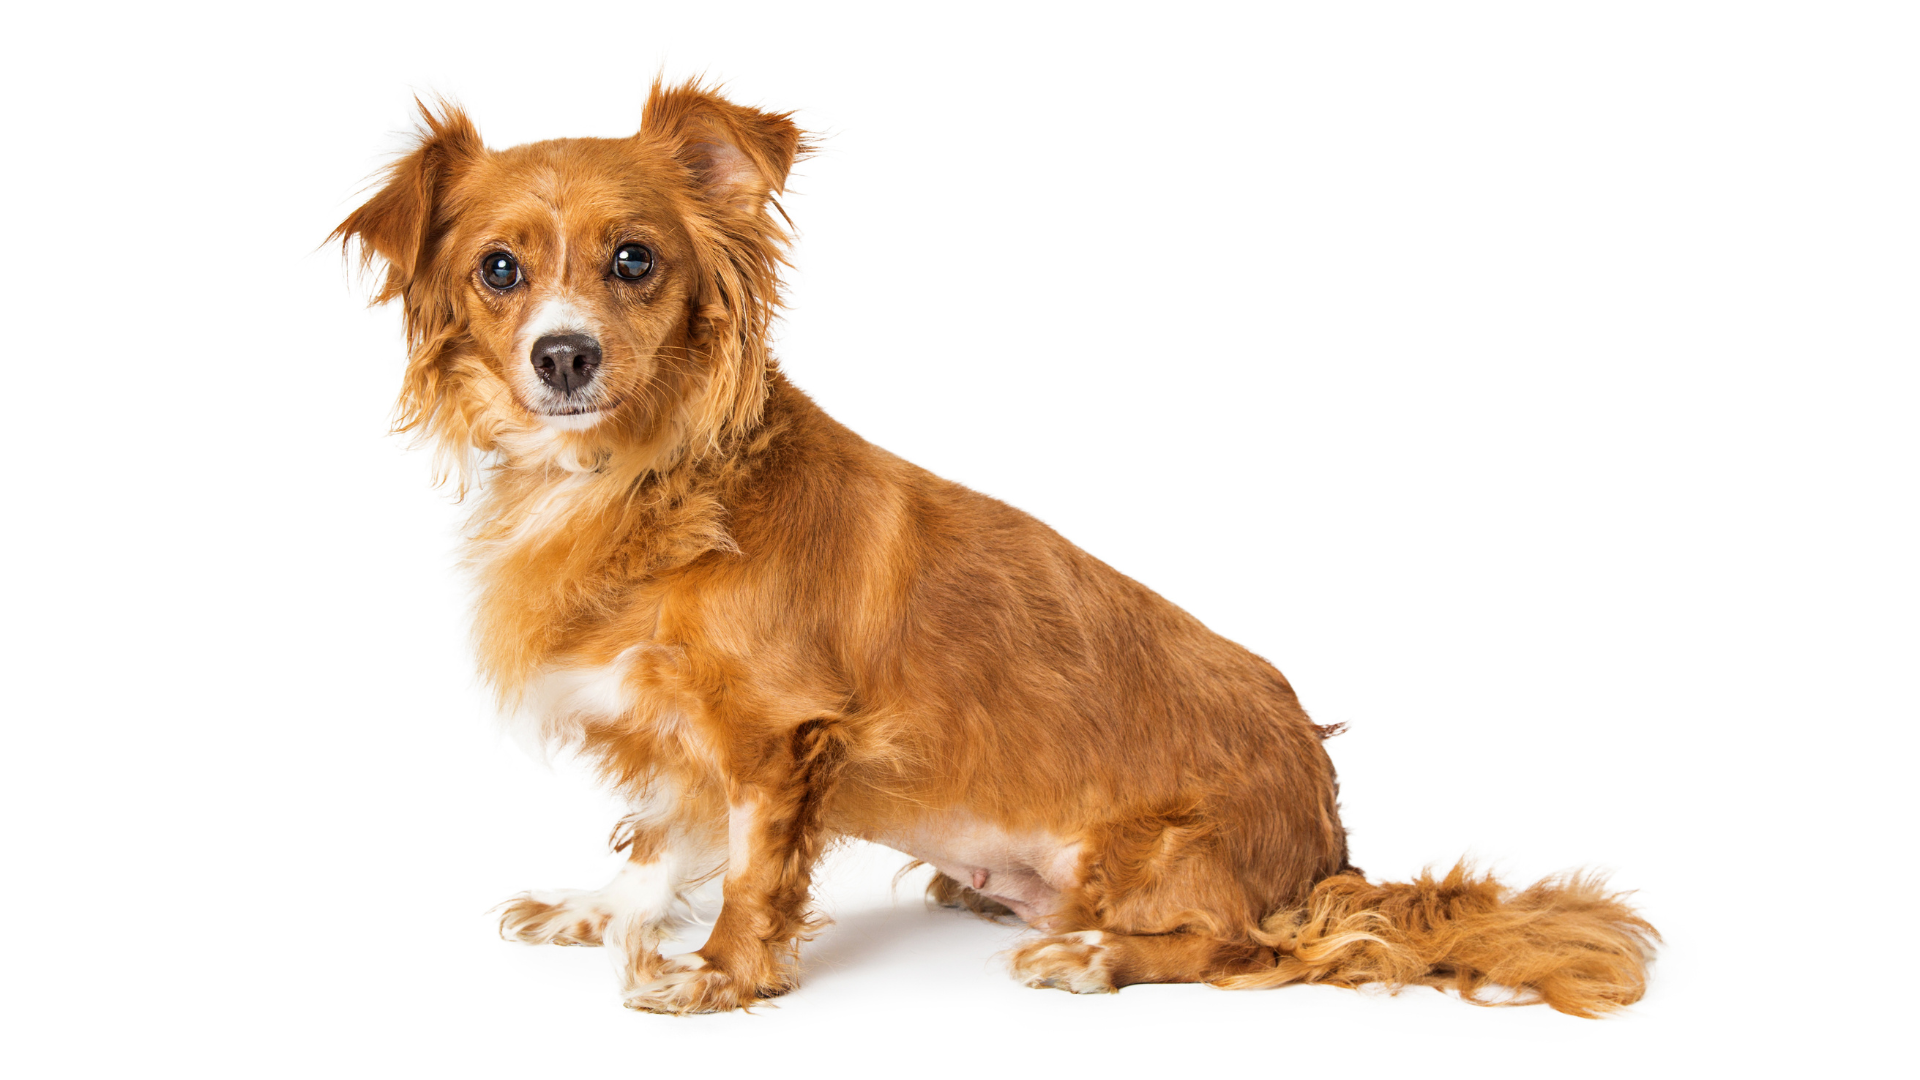 Patchy Hair Loss and Scabs in Dogs